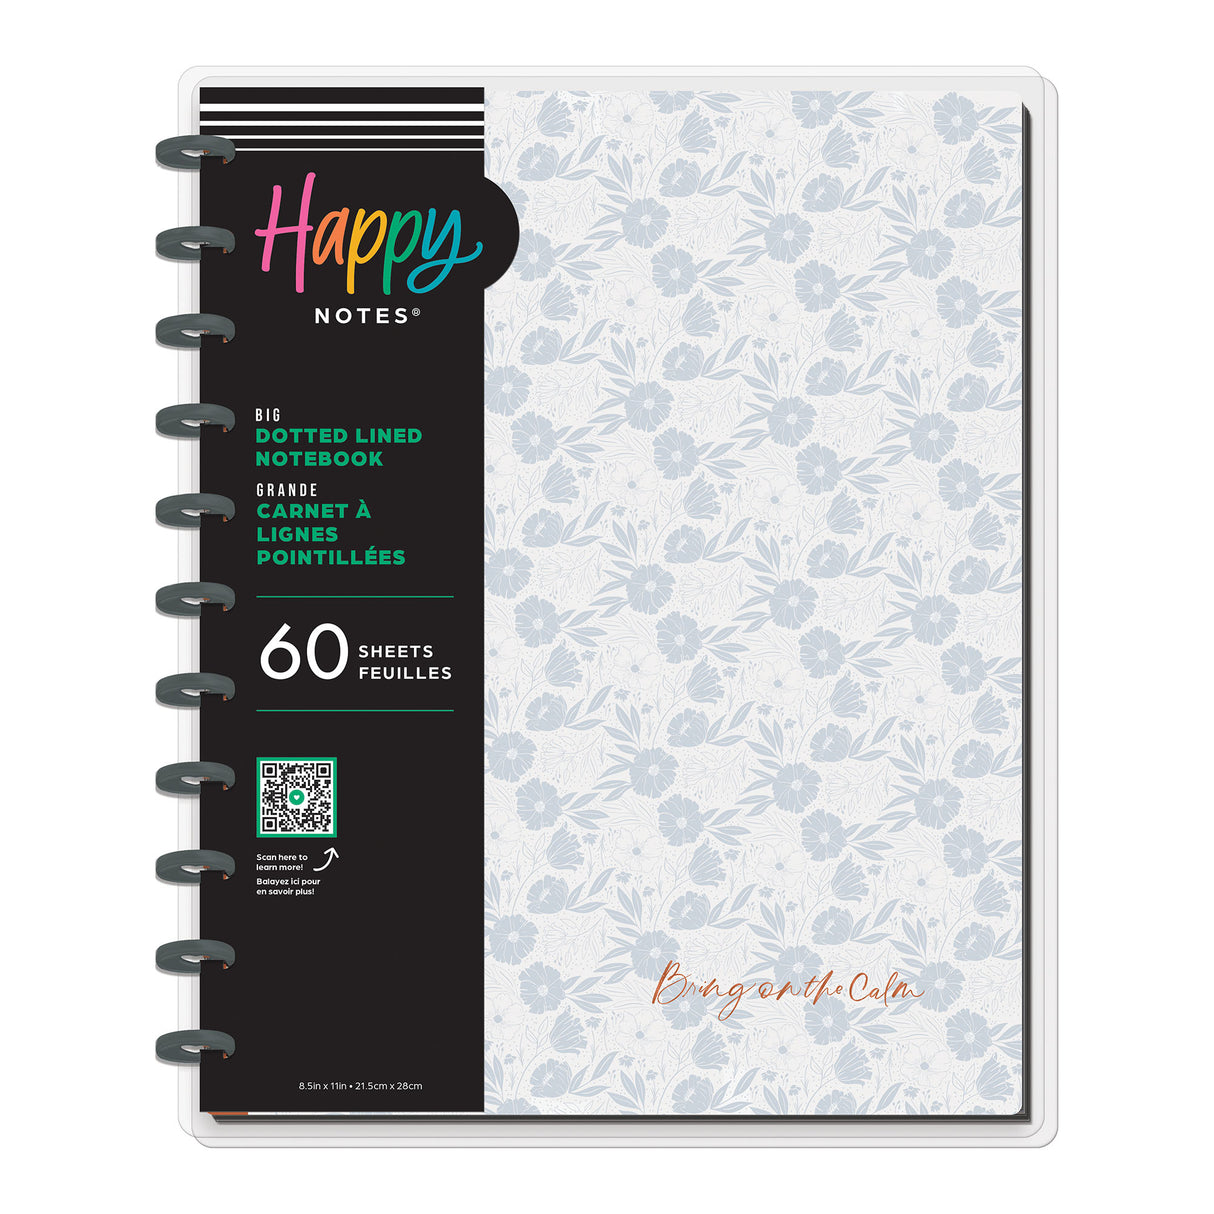 Happy Planner Homesteader BIG Notebook - Dotted Lined